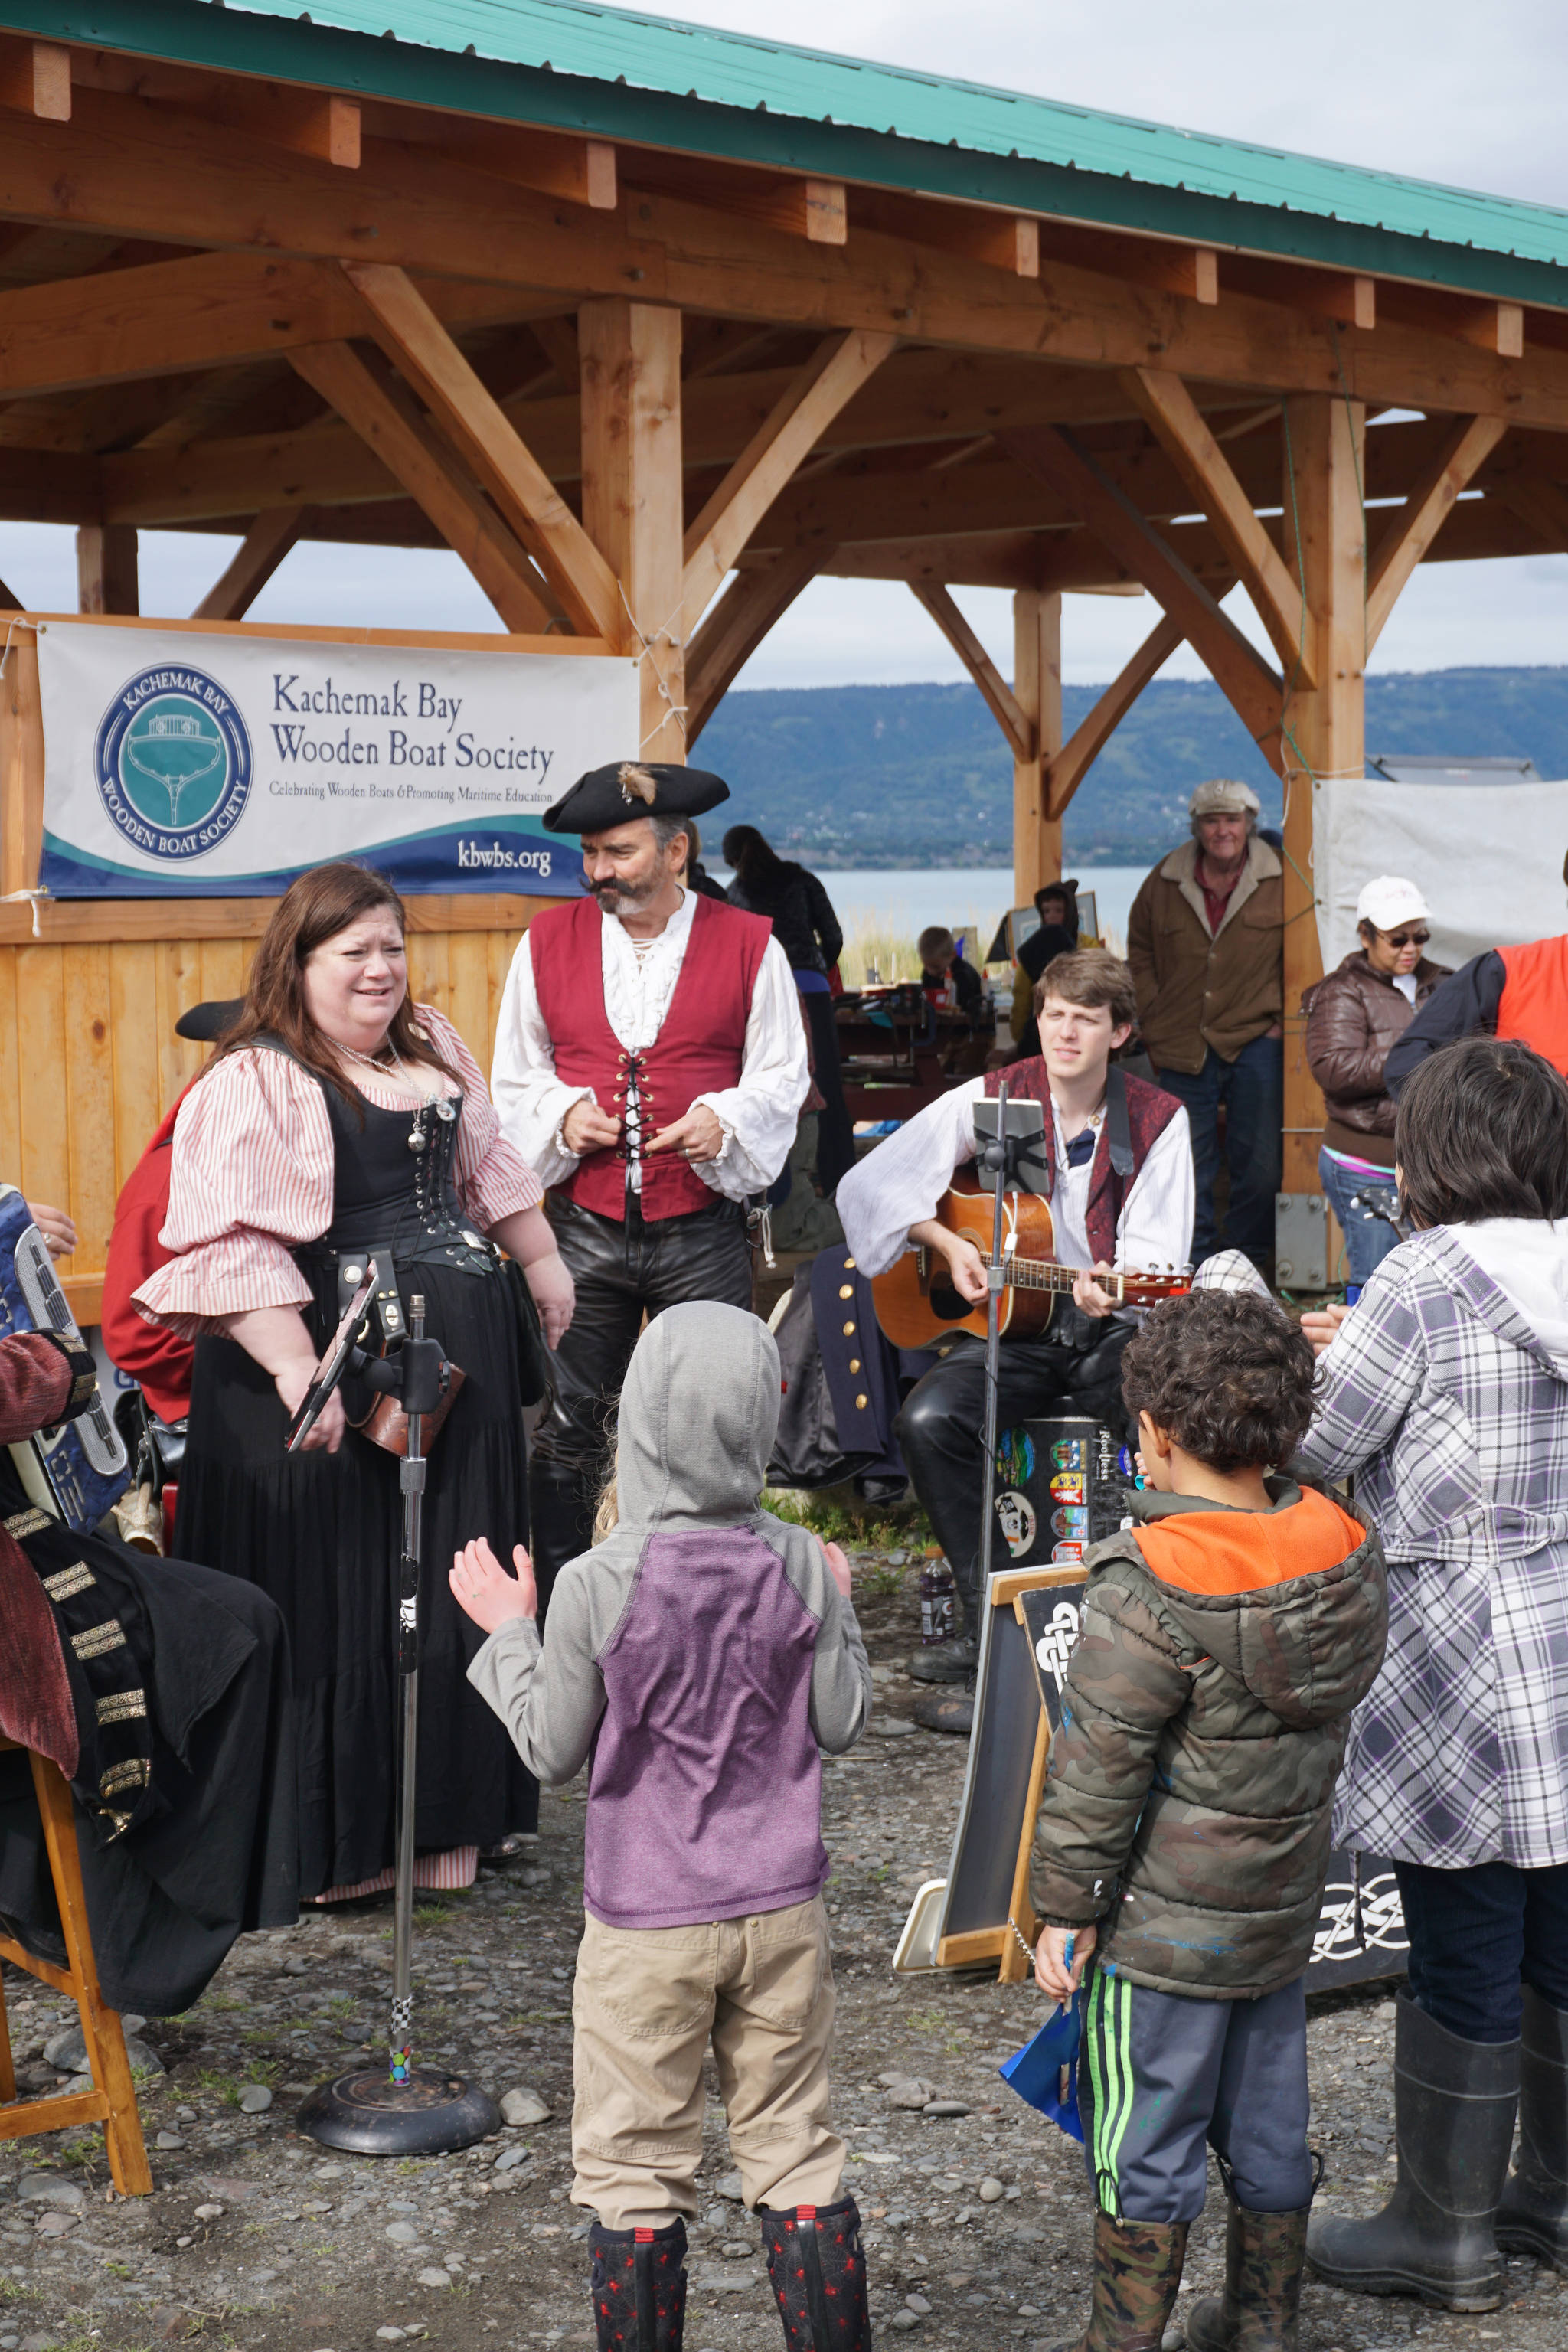 Erin Searcy-Dudgeon Wells of Rogues & Wenches, center, leads a sing along at last year’s Kachemak Bay Wooden Boat Society Festival on Sept. 2, 2017 at the Nick Dudiak Fishing Lagoon campground in Homer, Alaska. At left are Lucia Woofter and Lena Gonzales. At far right is Hunter Woofter, Devin Frey, second from right, and Bob Woofter. (File photo by Michael Armstrong, Homer News)